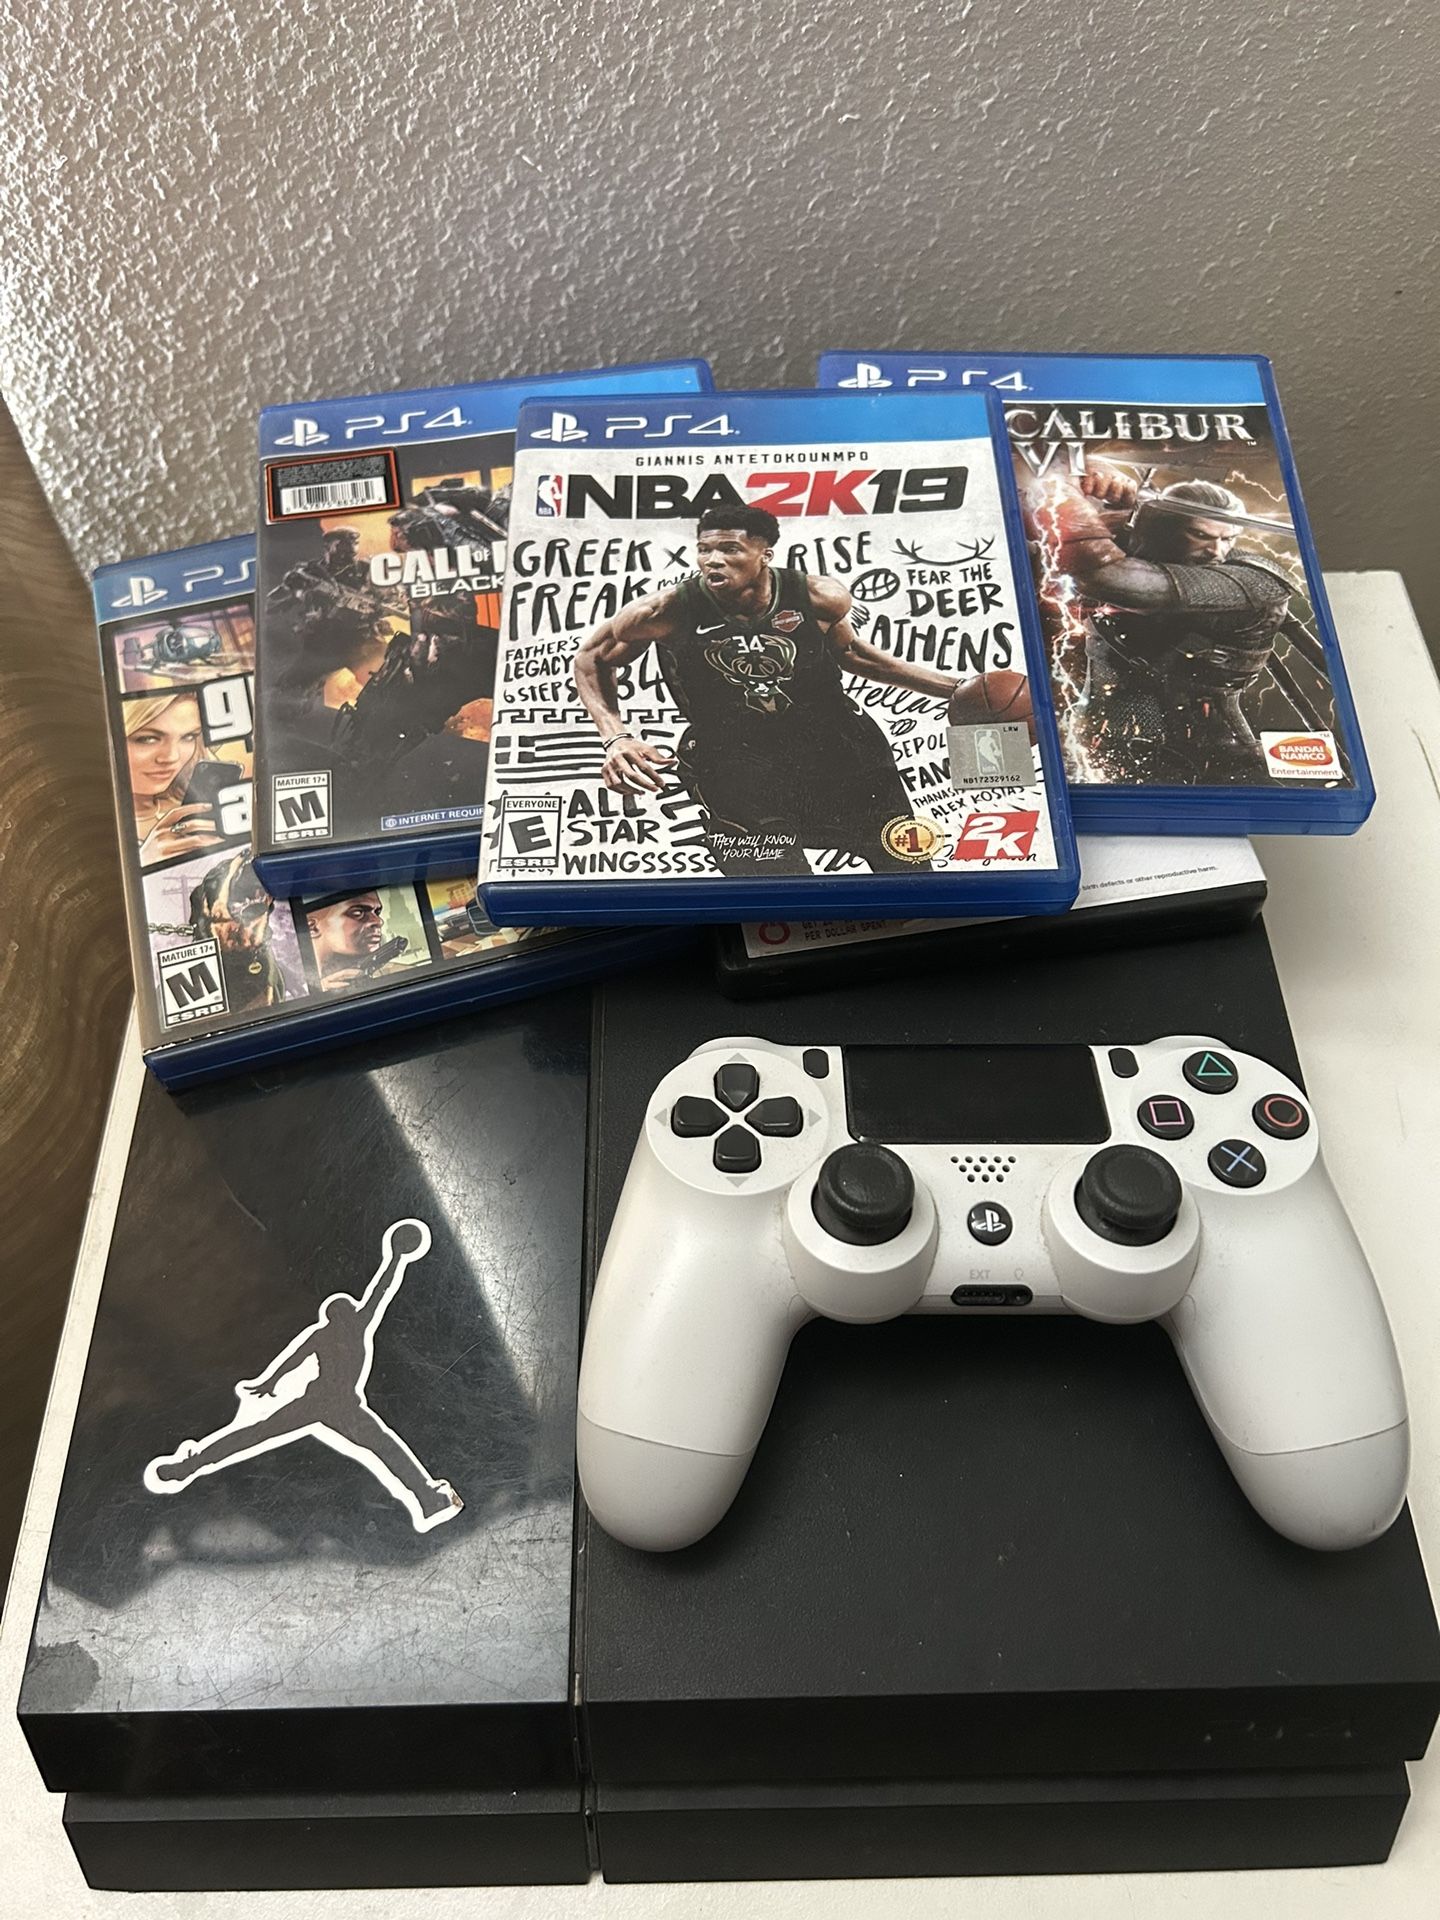 PS4, Controller, And 5 Games